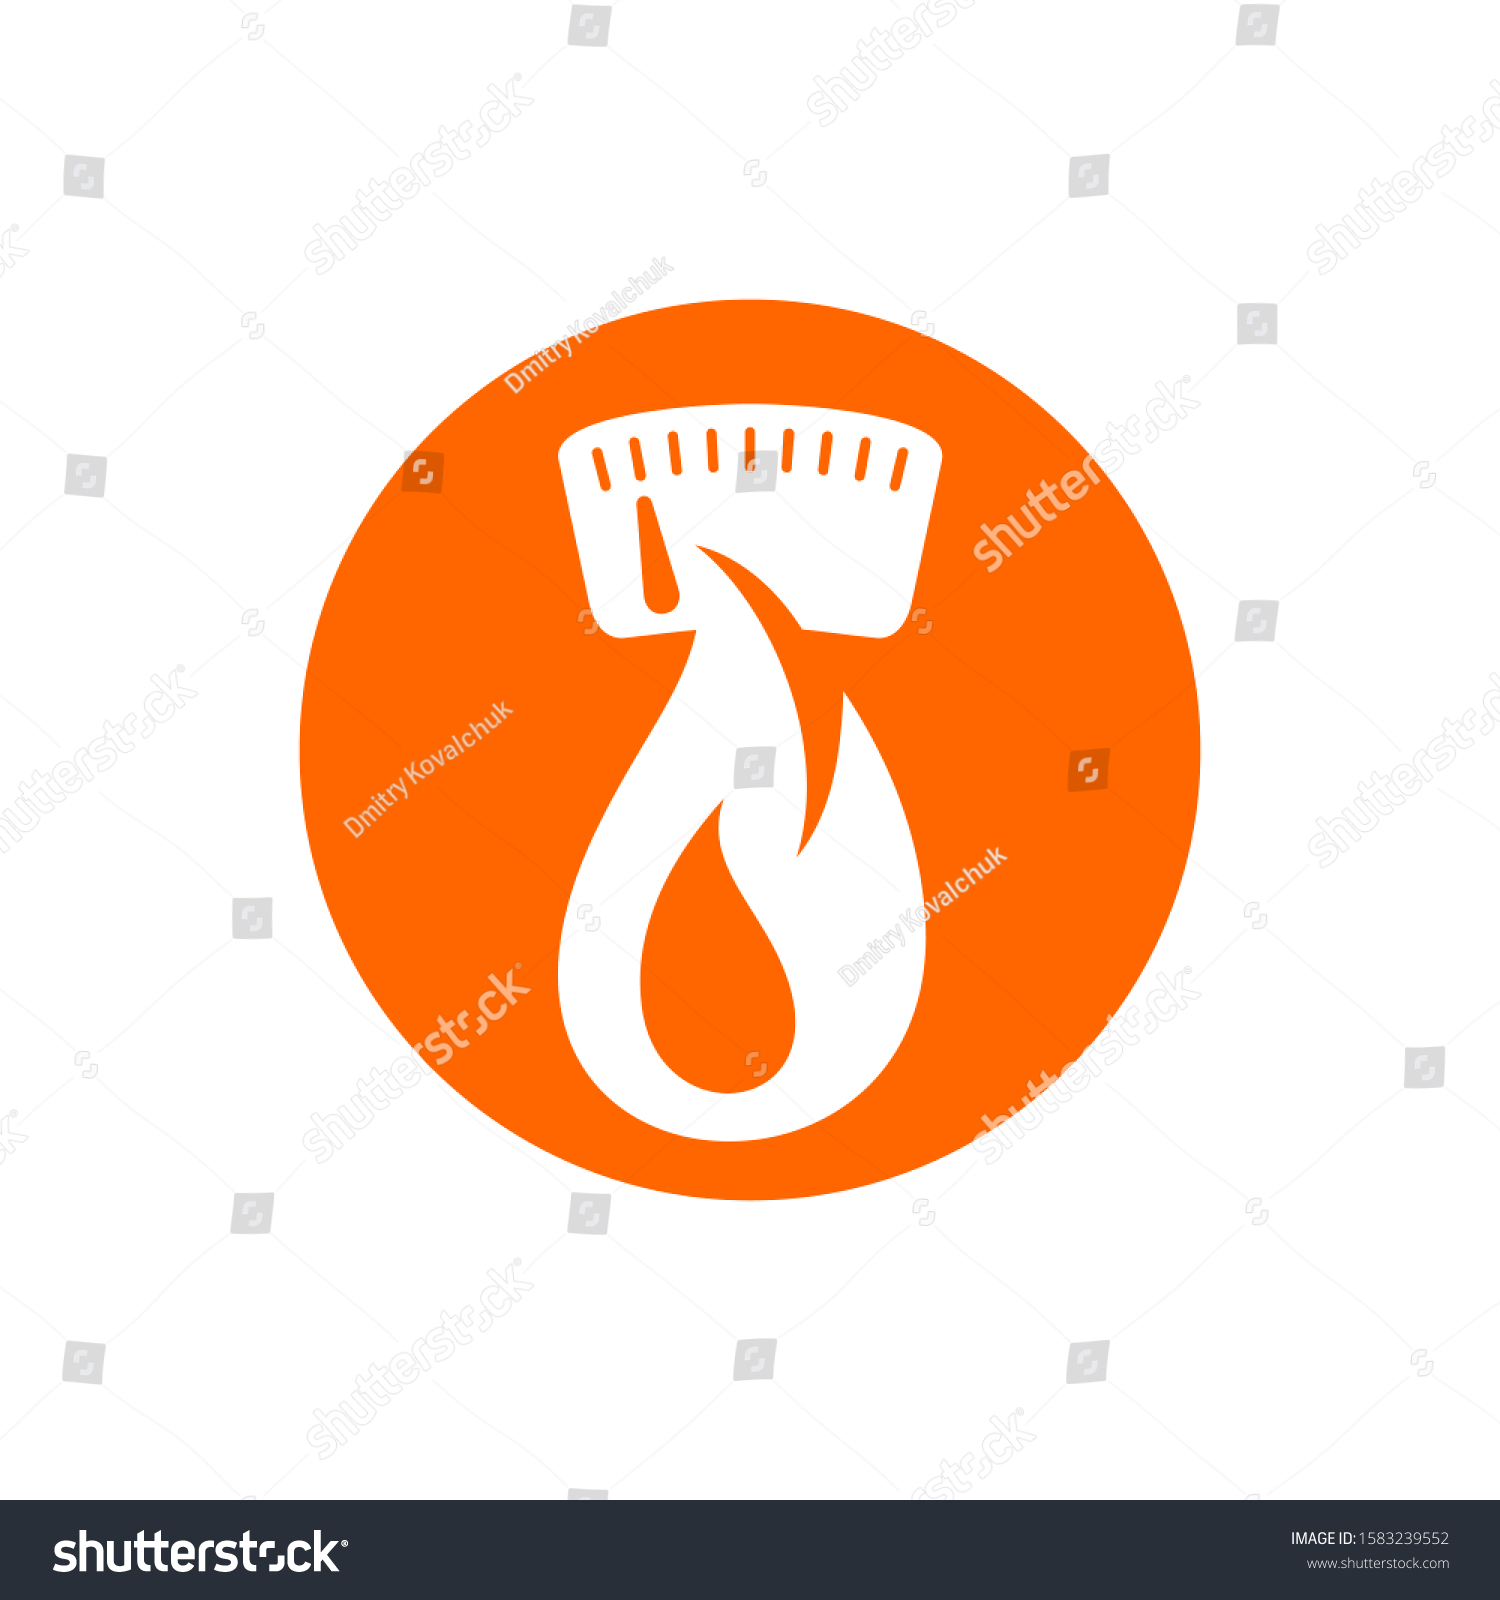 SVG of kcal icon (calories sign) combination of flame (fat burning) and weight scales - isolated vector emblem for healthy food, fitness or diet program packaging svg